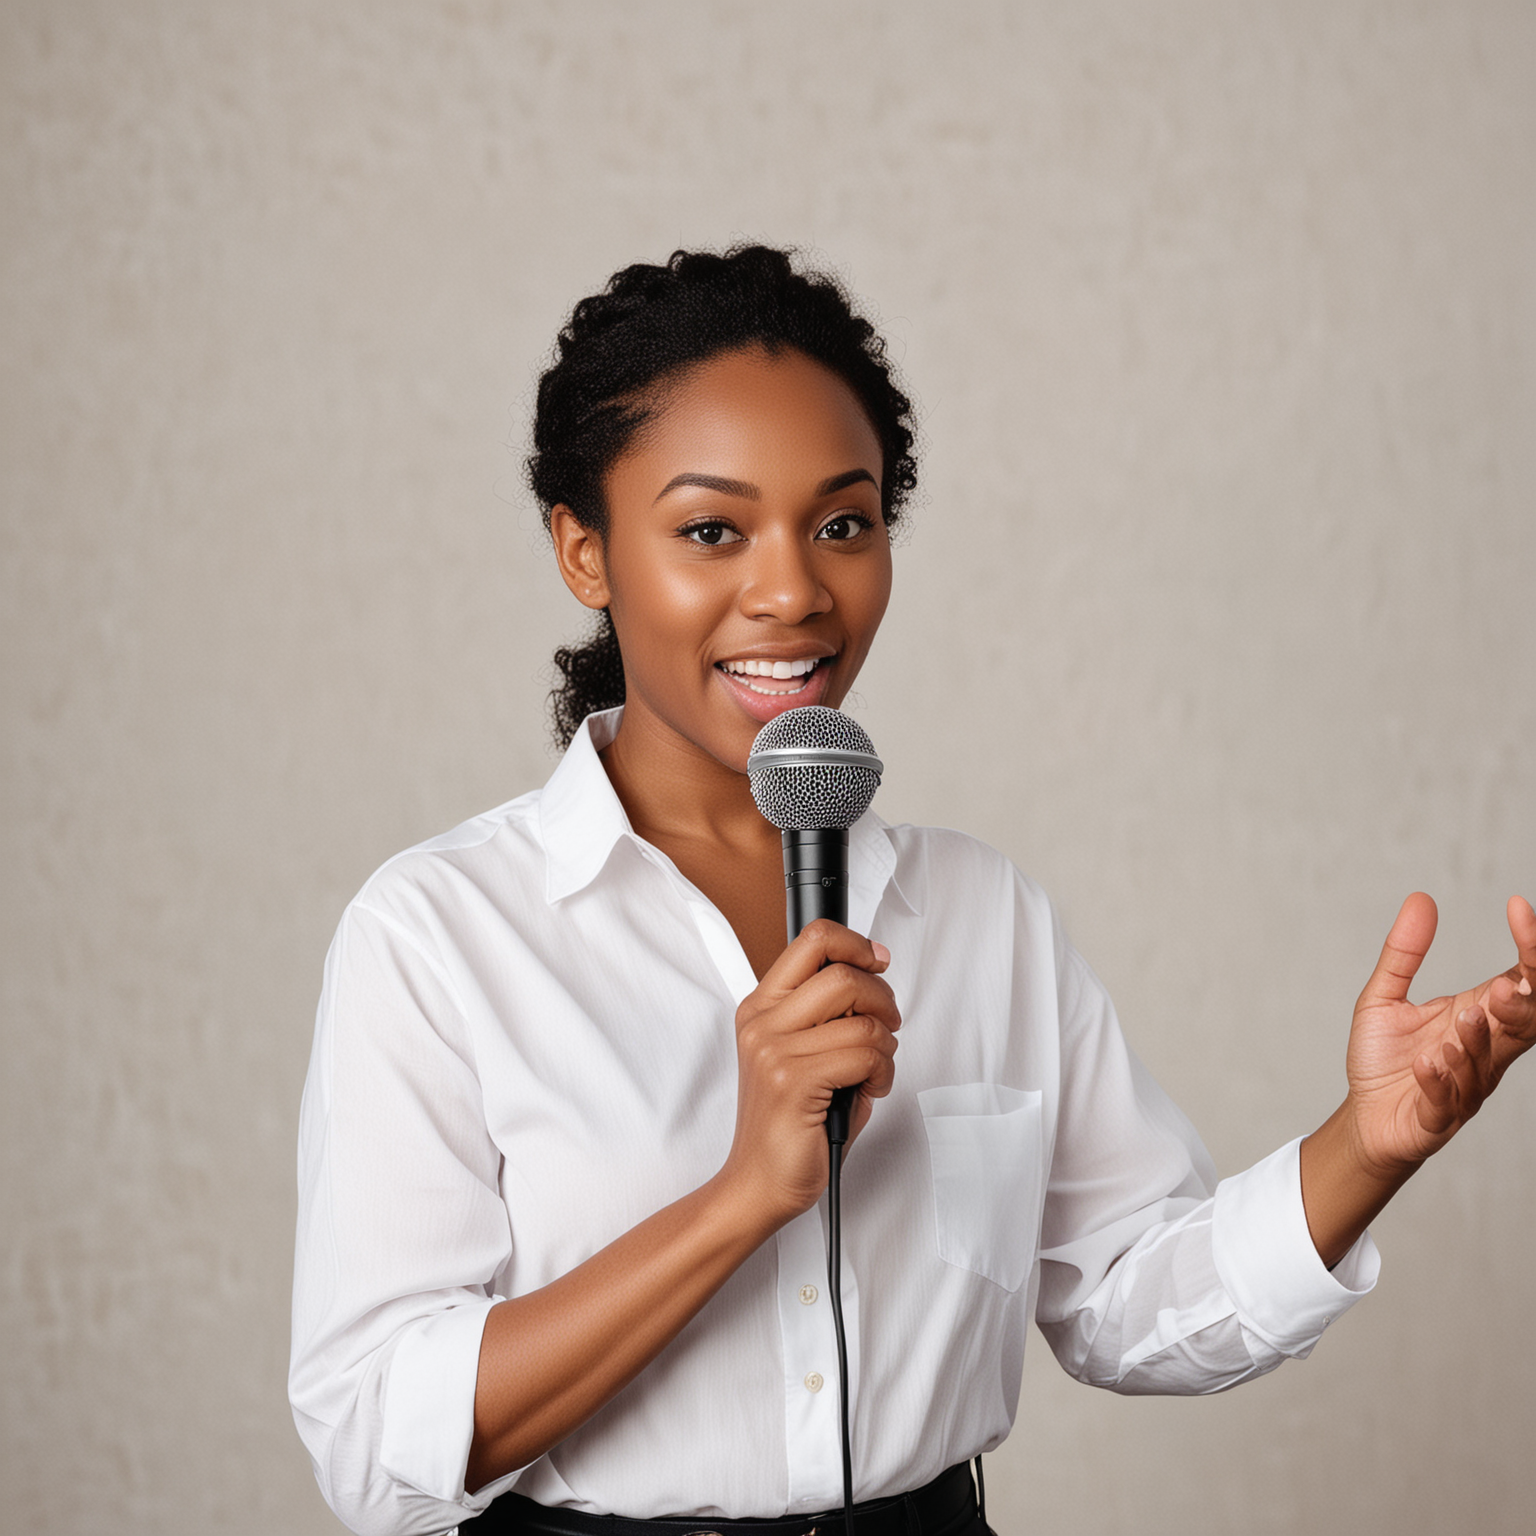 BLACK WOMAN IN WHITE SHIRT HOLDING MICROPHONE TALKING